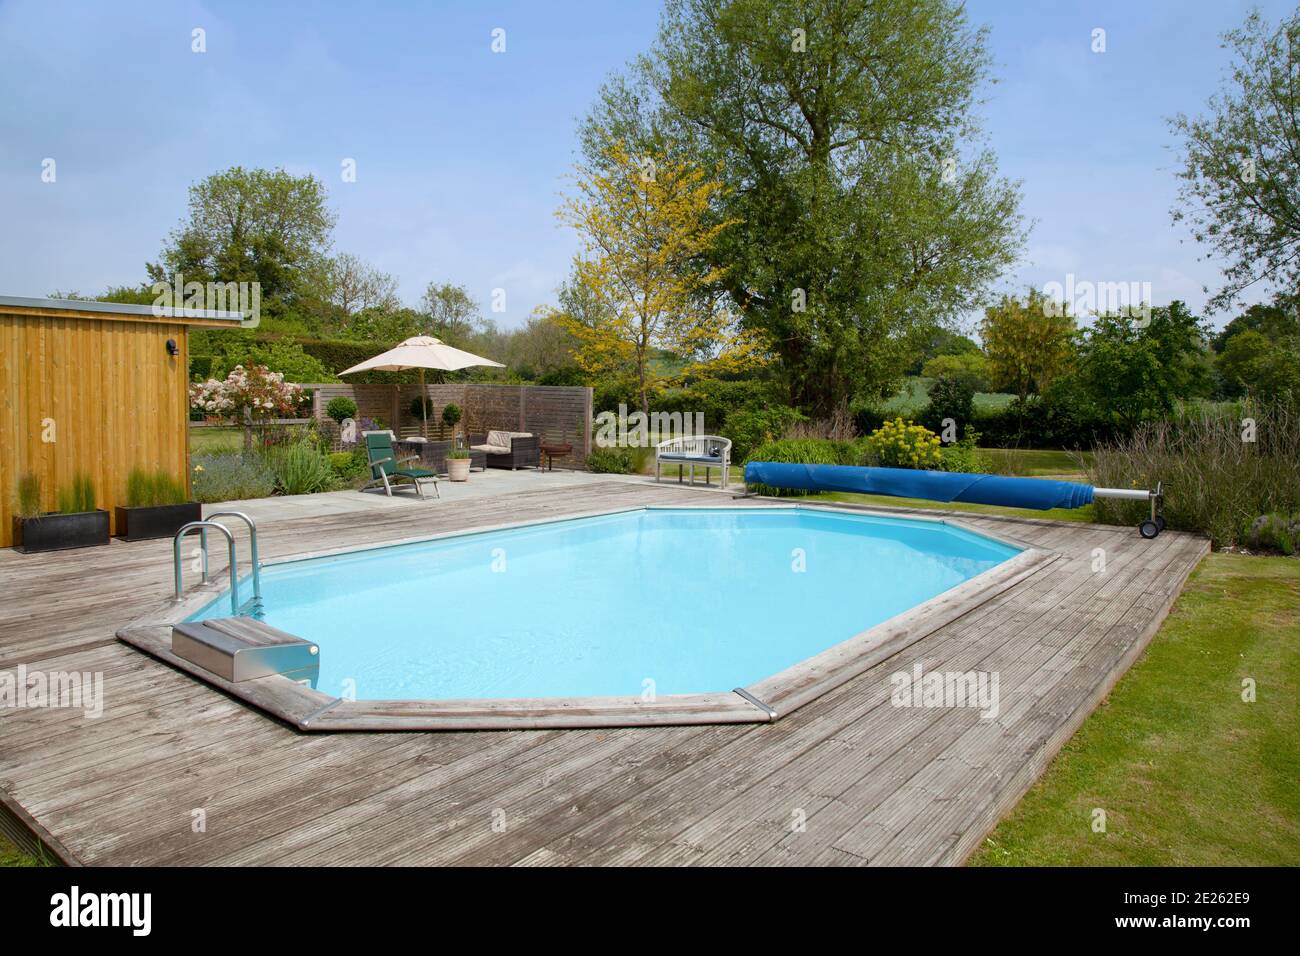 Octagonal private swimming pool with wooden decking surround Stock Photo